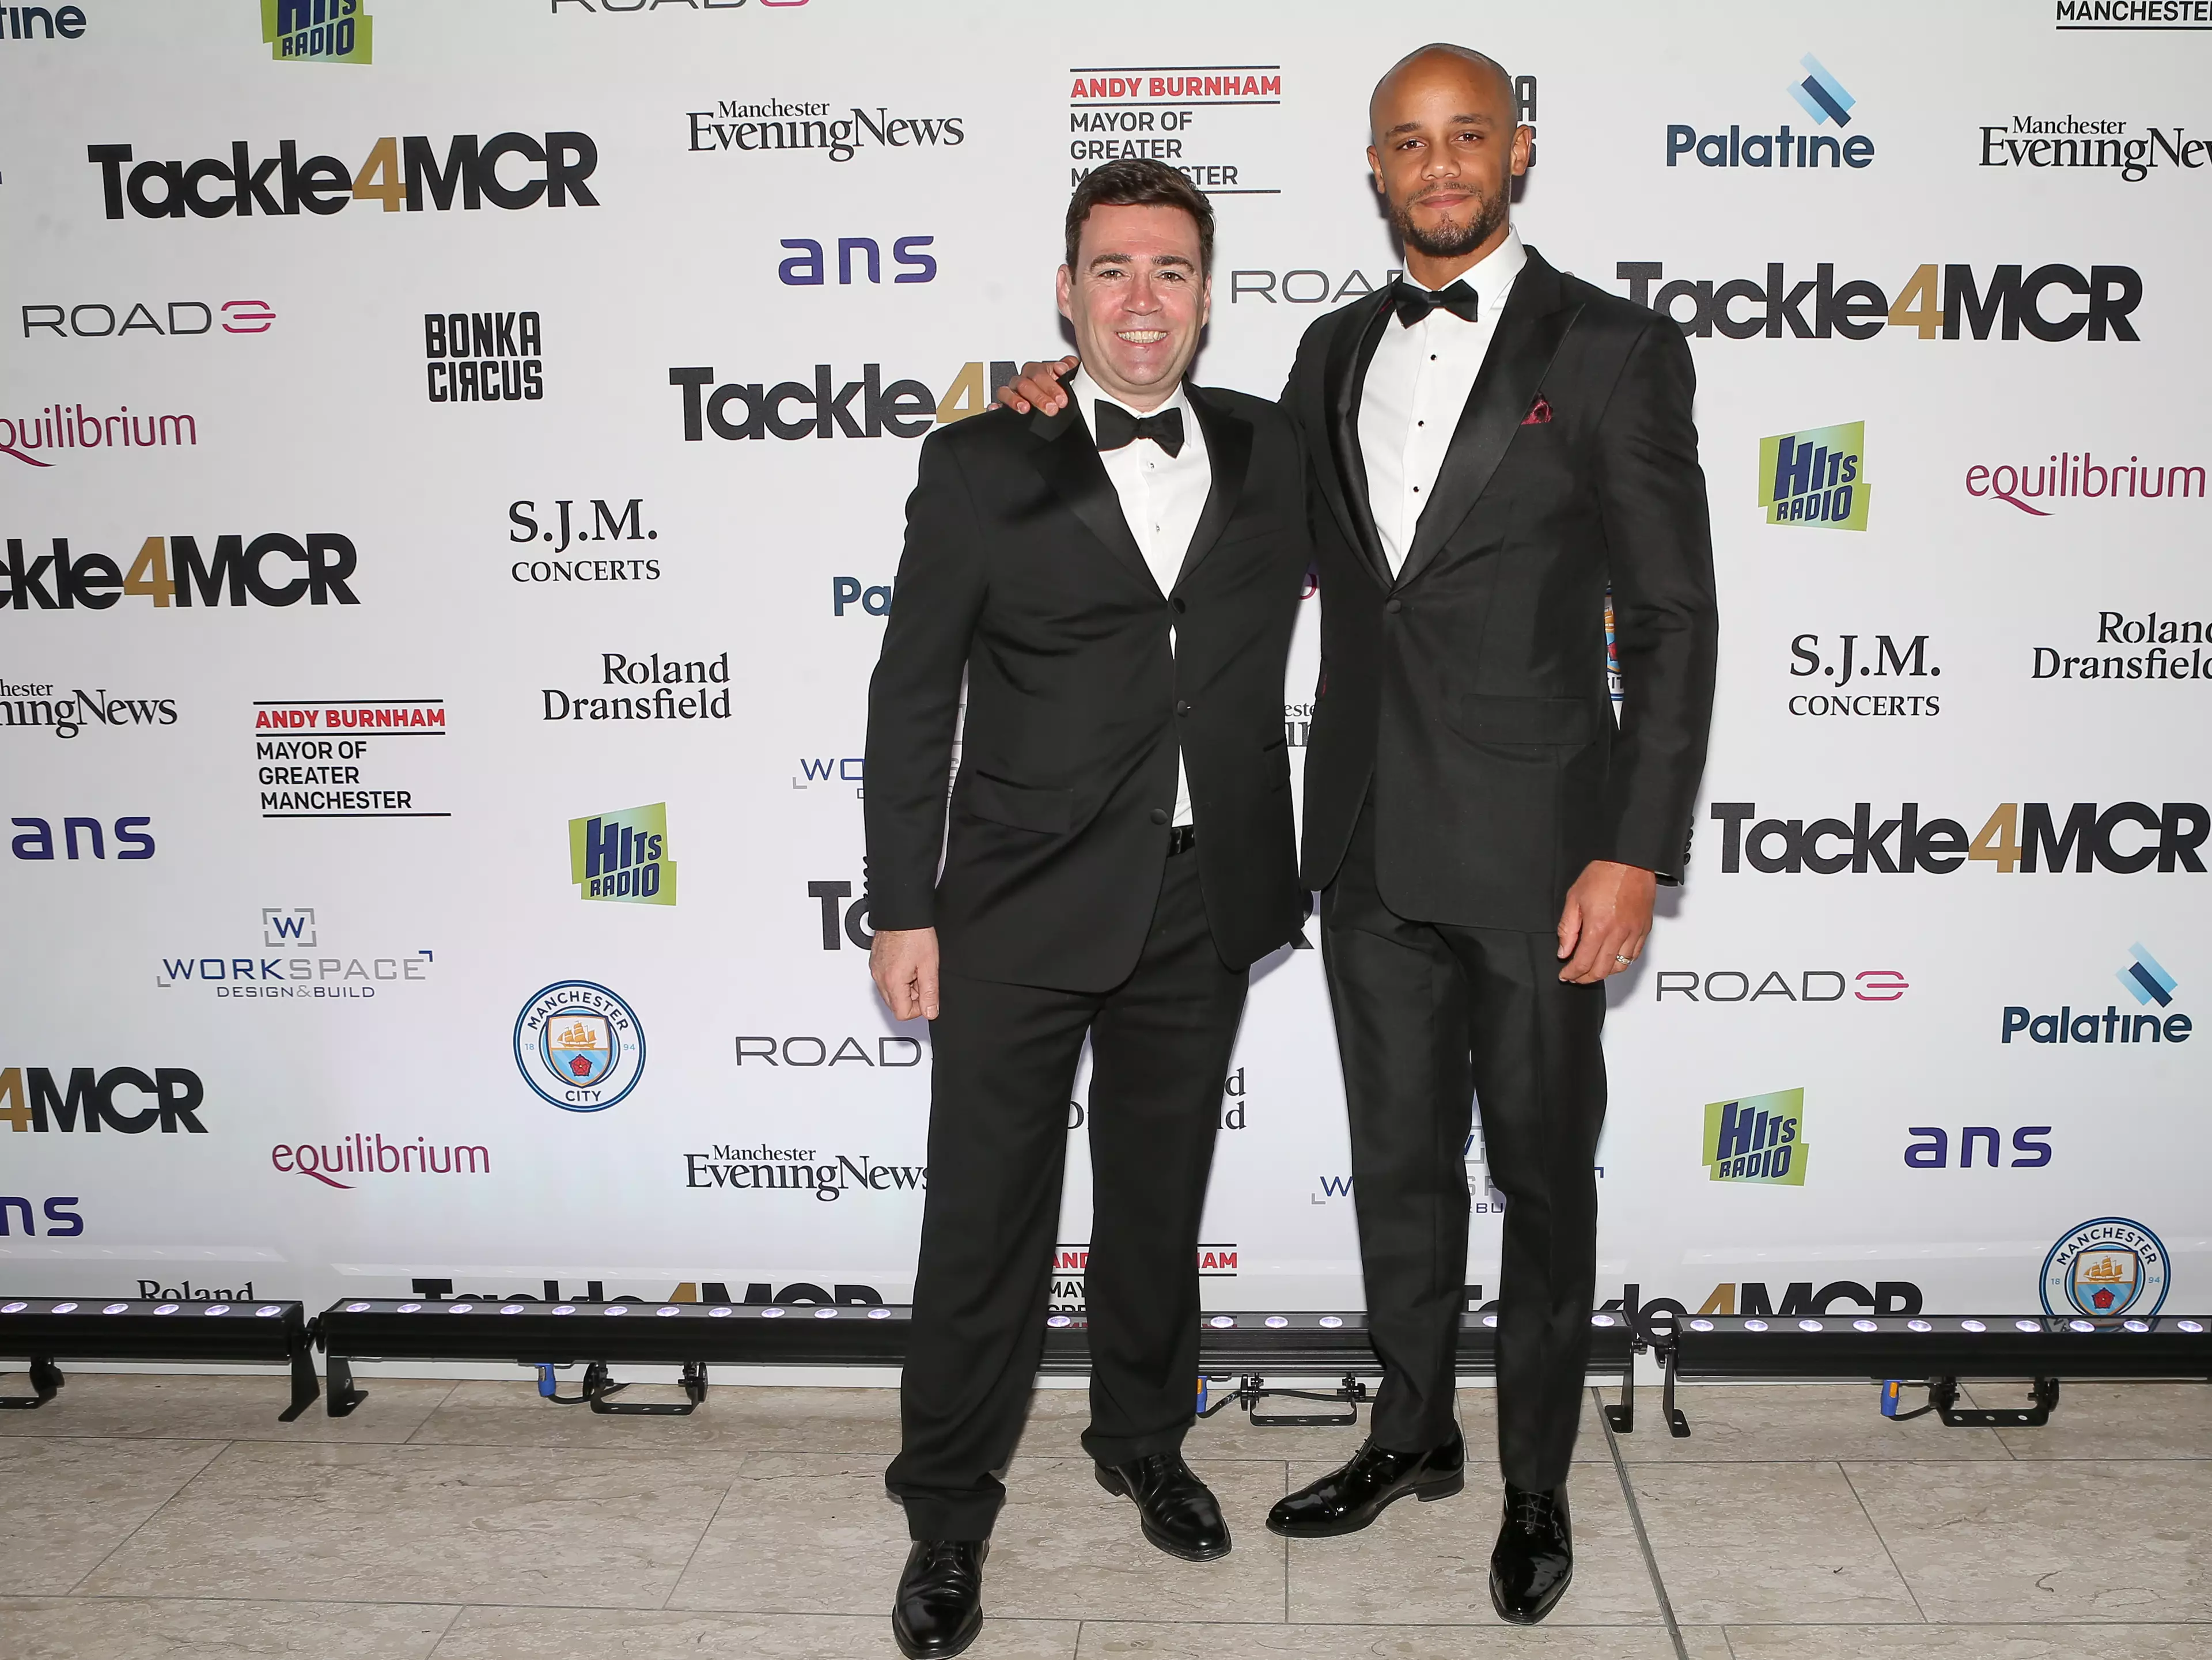 Kompany with Mayor of Greater Manchester Andy Burnham. Image: PA Images